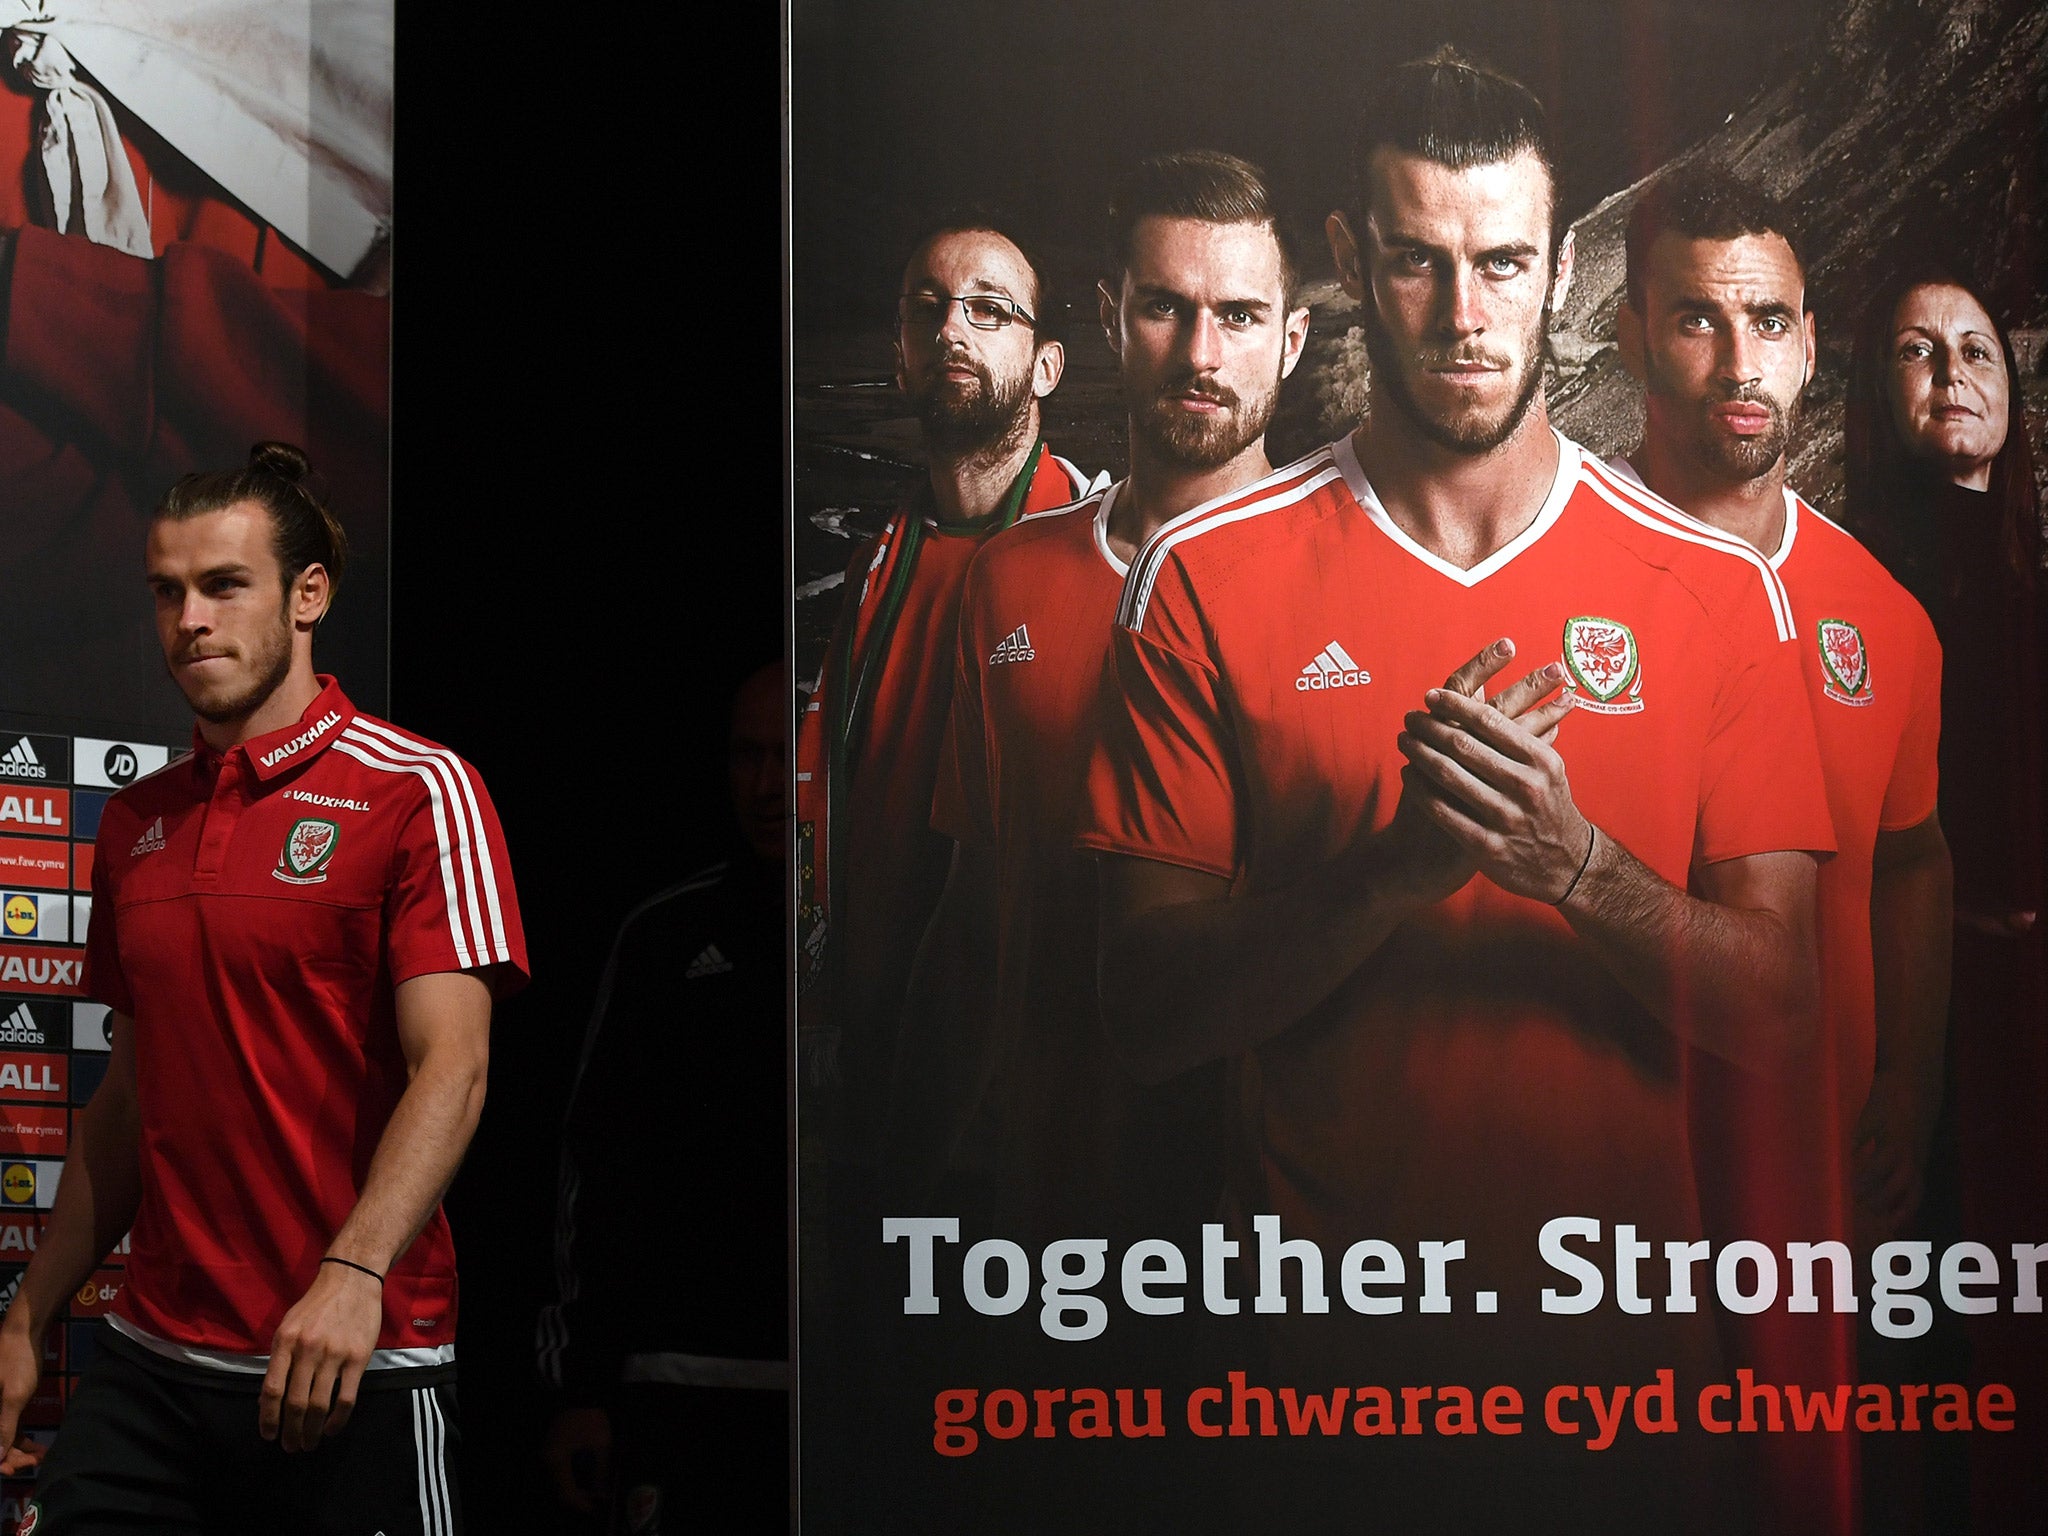 Gareth Bale appears at a press conference in front of a large 'Together. Stronger' poster